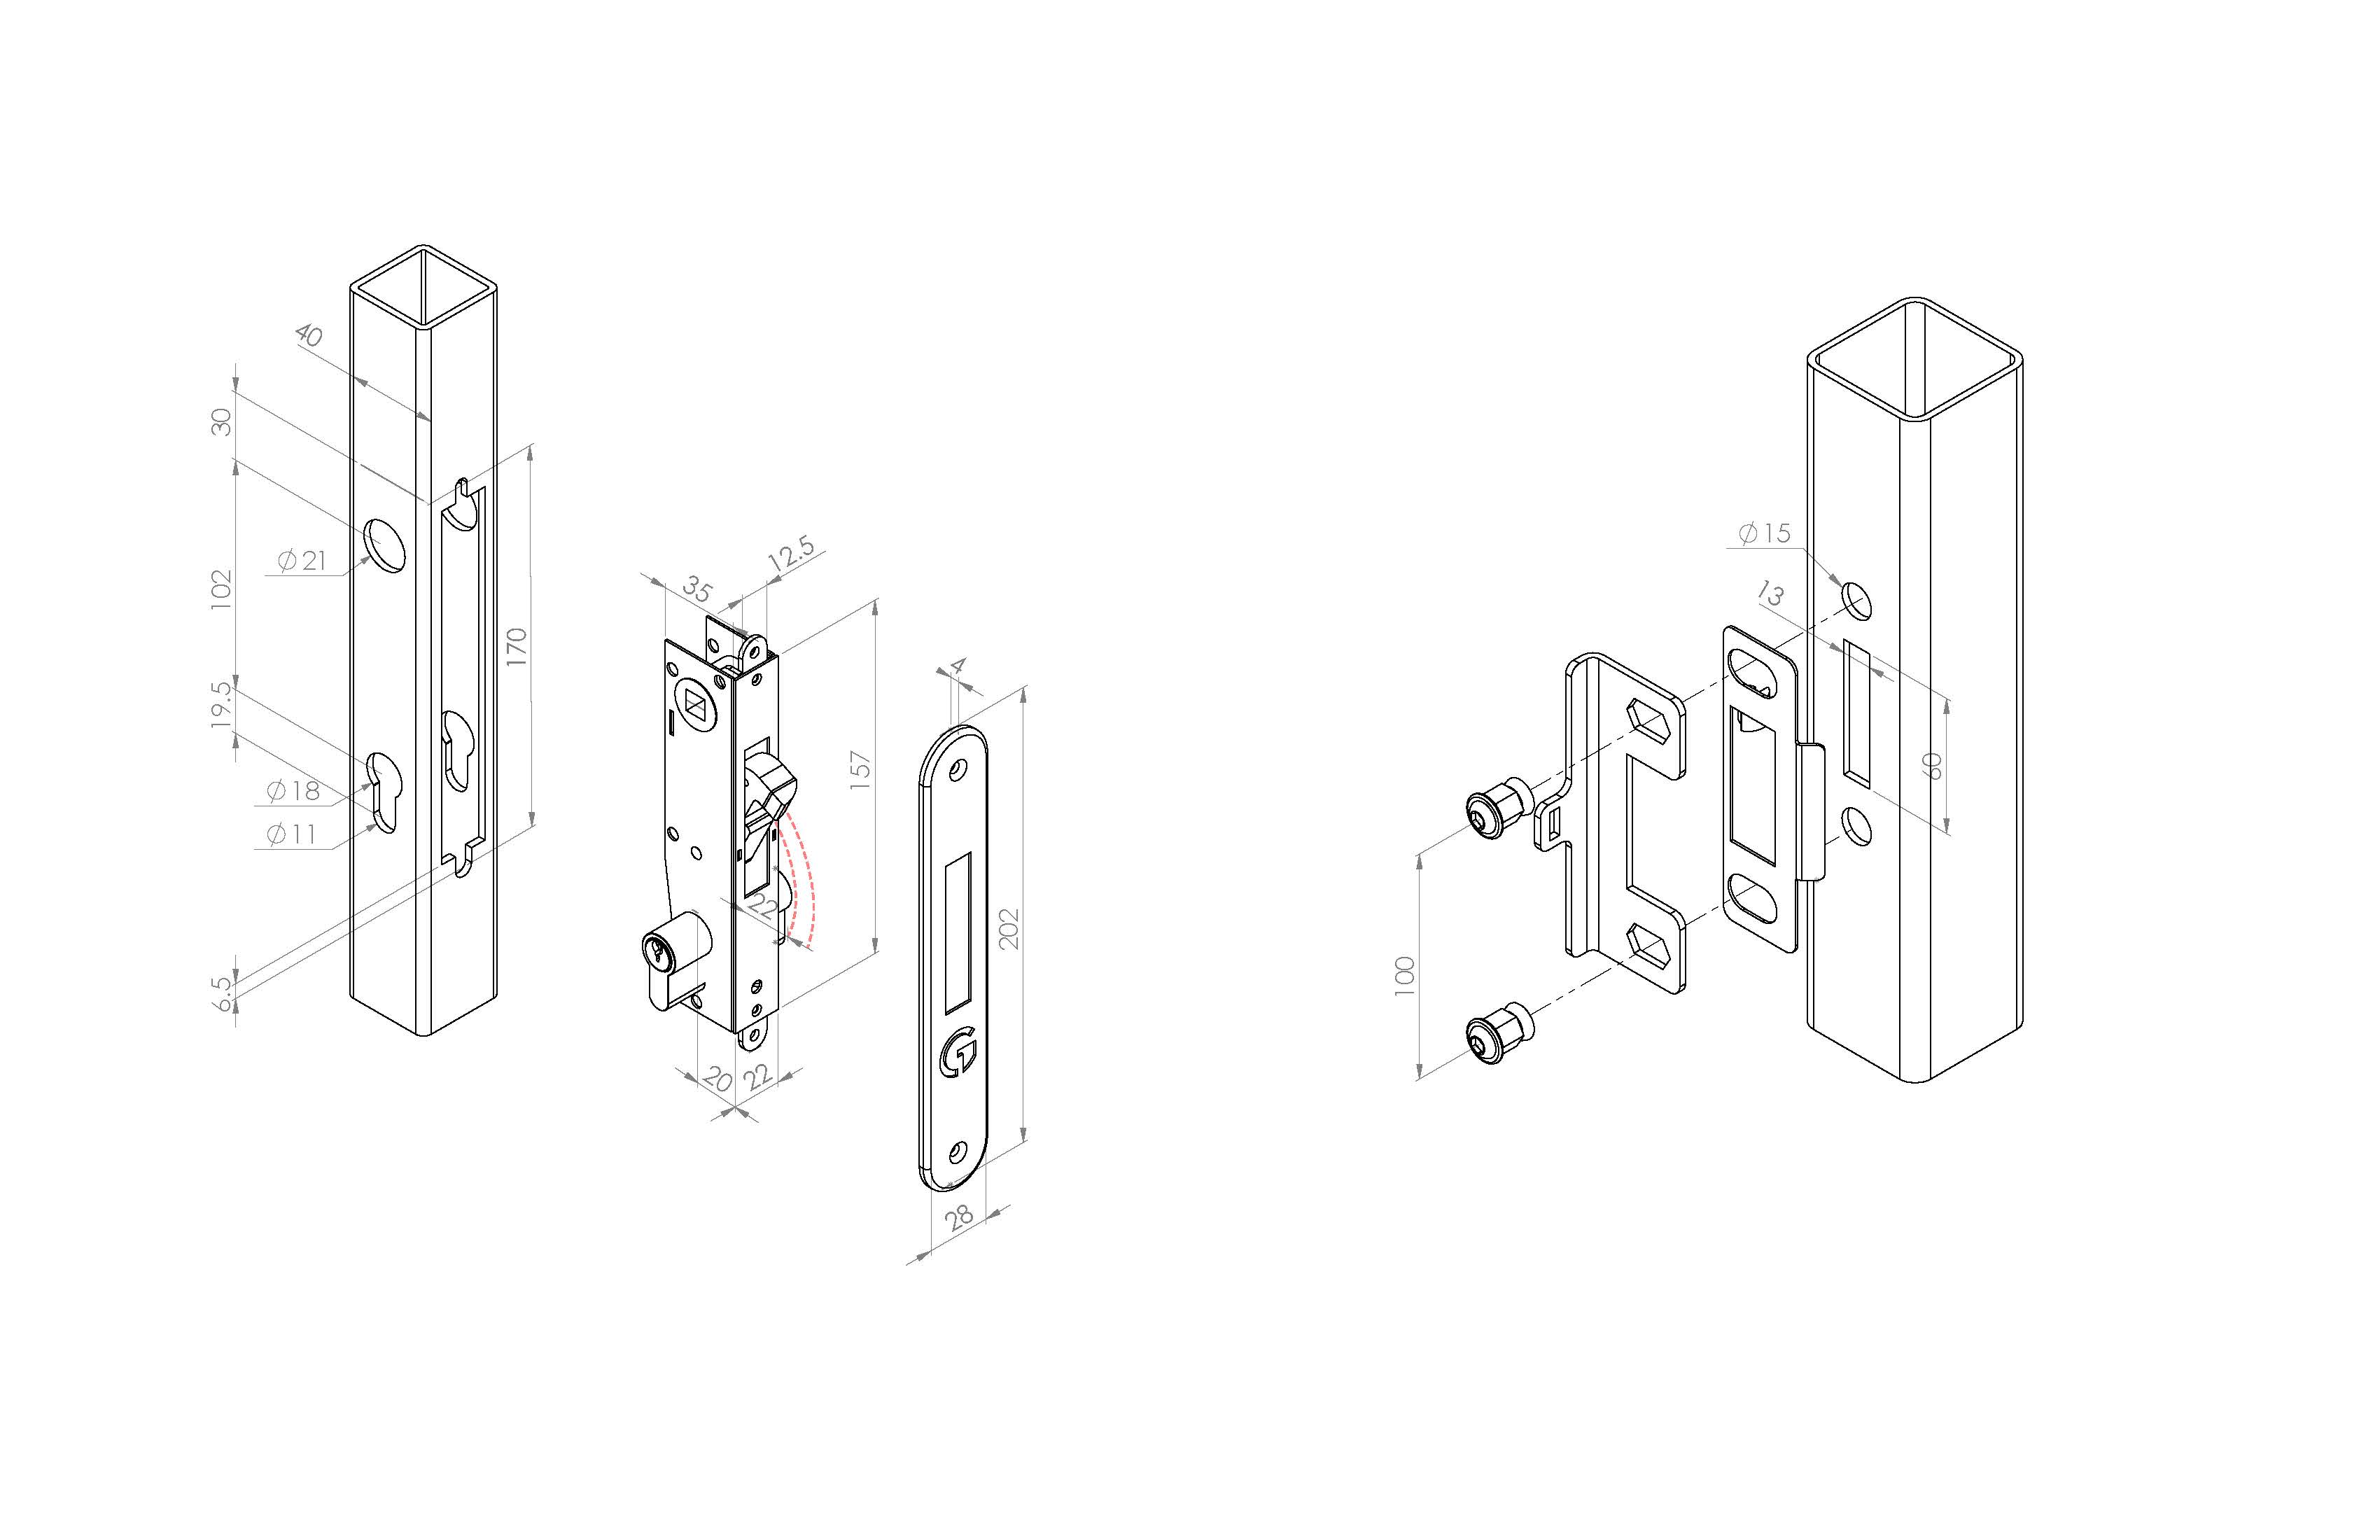 Technical drawings of the mortice hook lock and the keep that goes with it